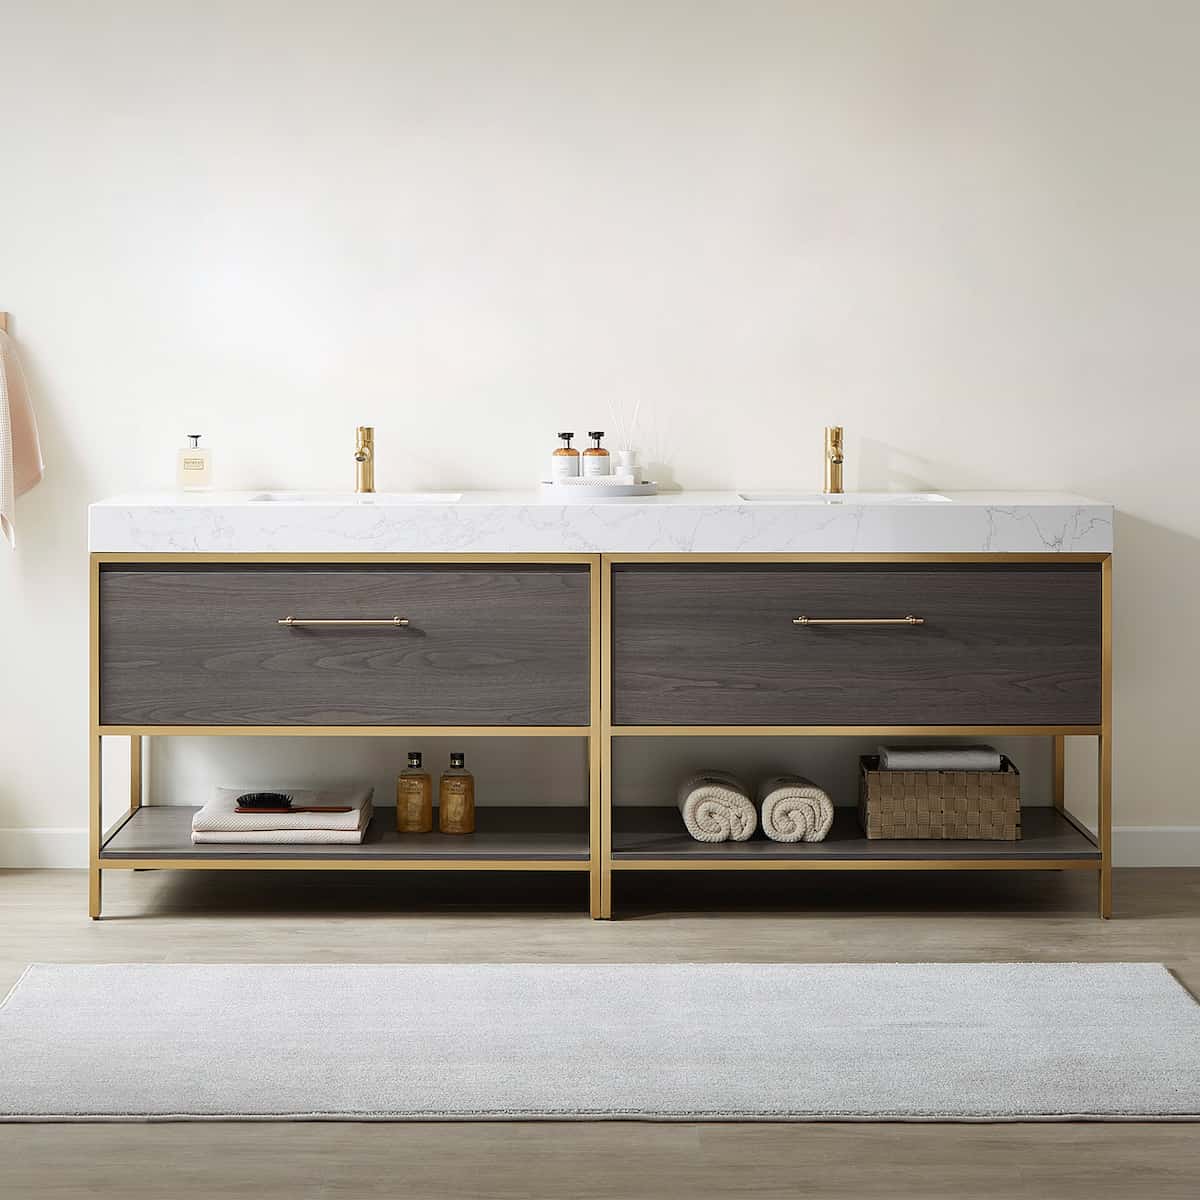 Vinnova Palma 84 Inch Freestanding Double Sink Bath Vanity in Suleiman Oak with White Composite Grain Stone Without Mirror in Bathroom 701284G-SO-GW-NM